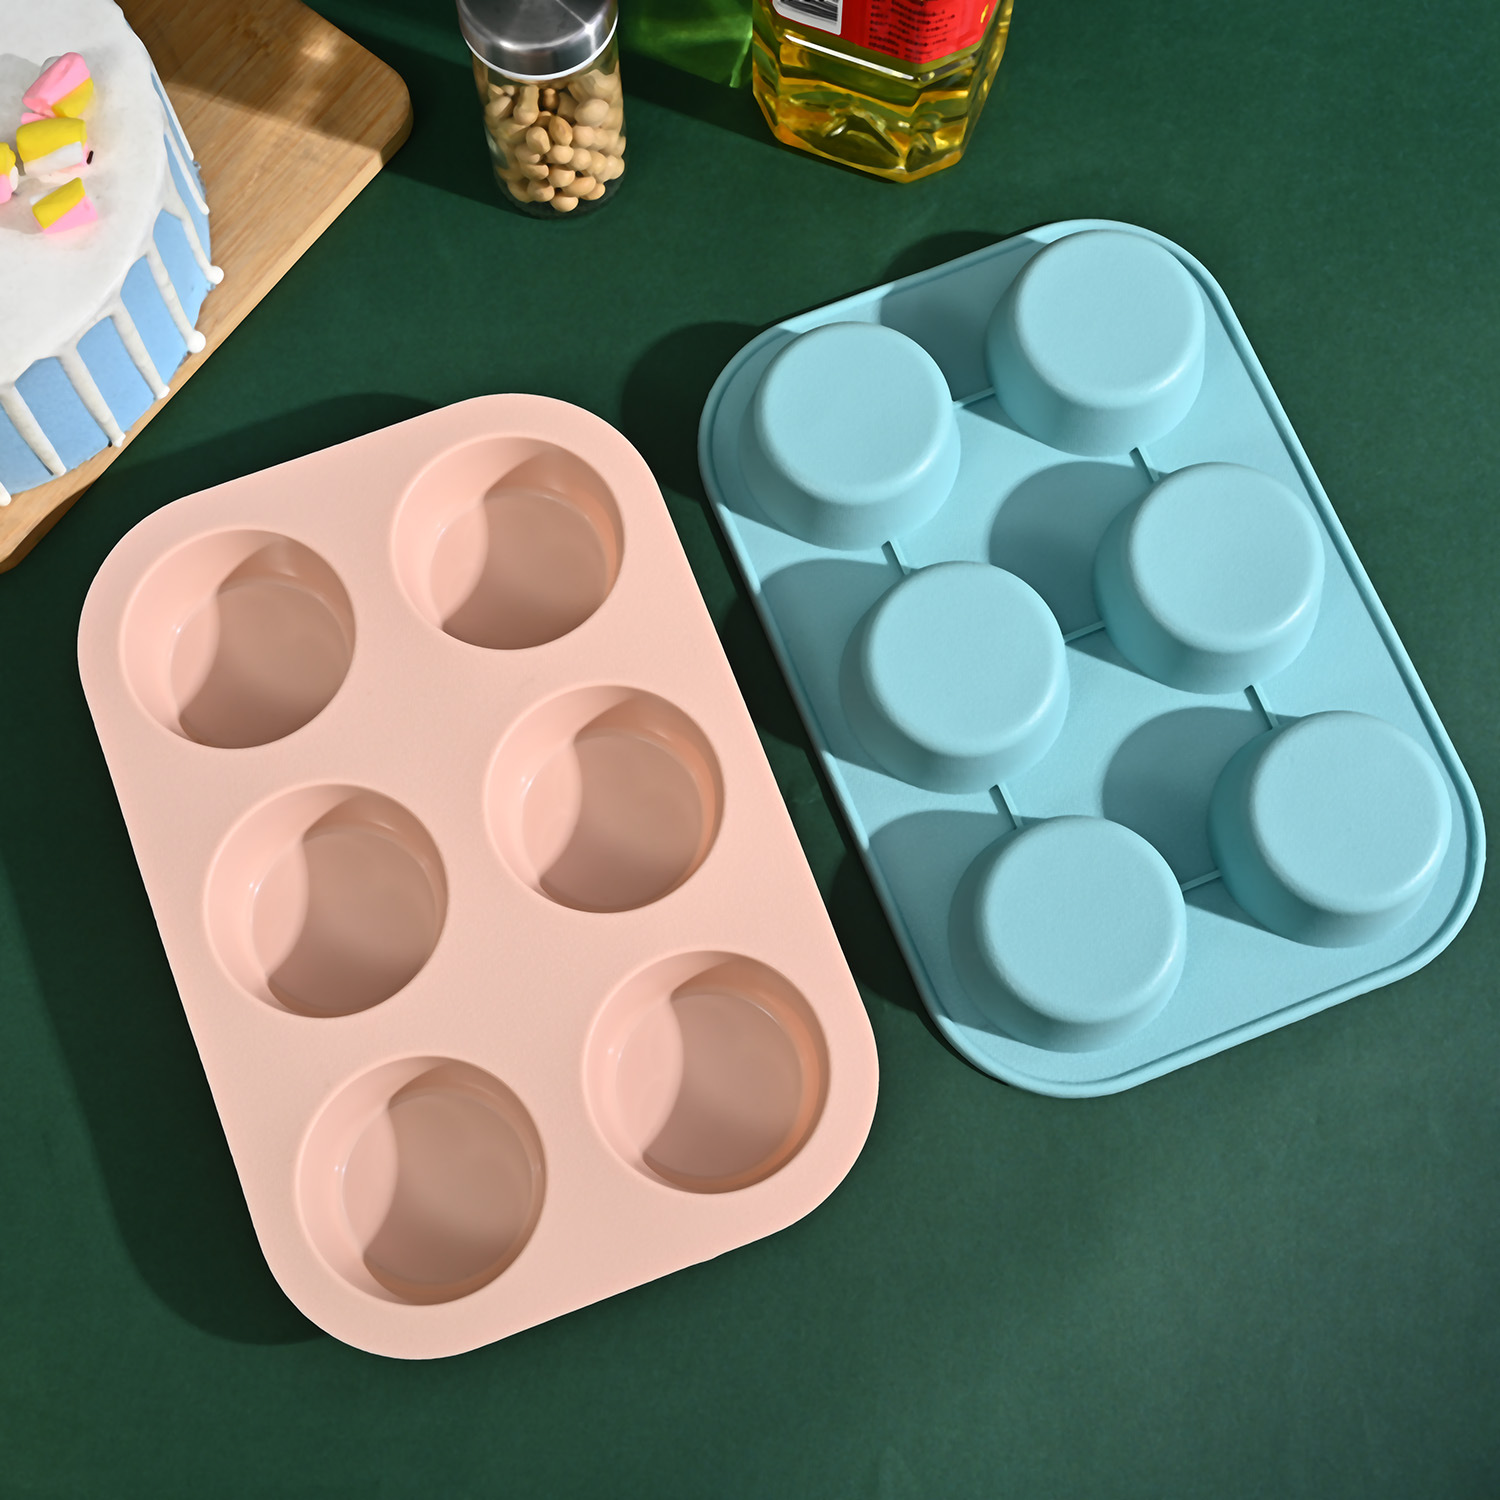 6-Piece Silicone Cake Mold Food Grade round Diy Mousse Mold Easy to Remove Film Non-Stick Heatproof Baking Utensils